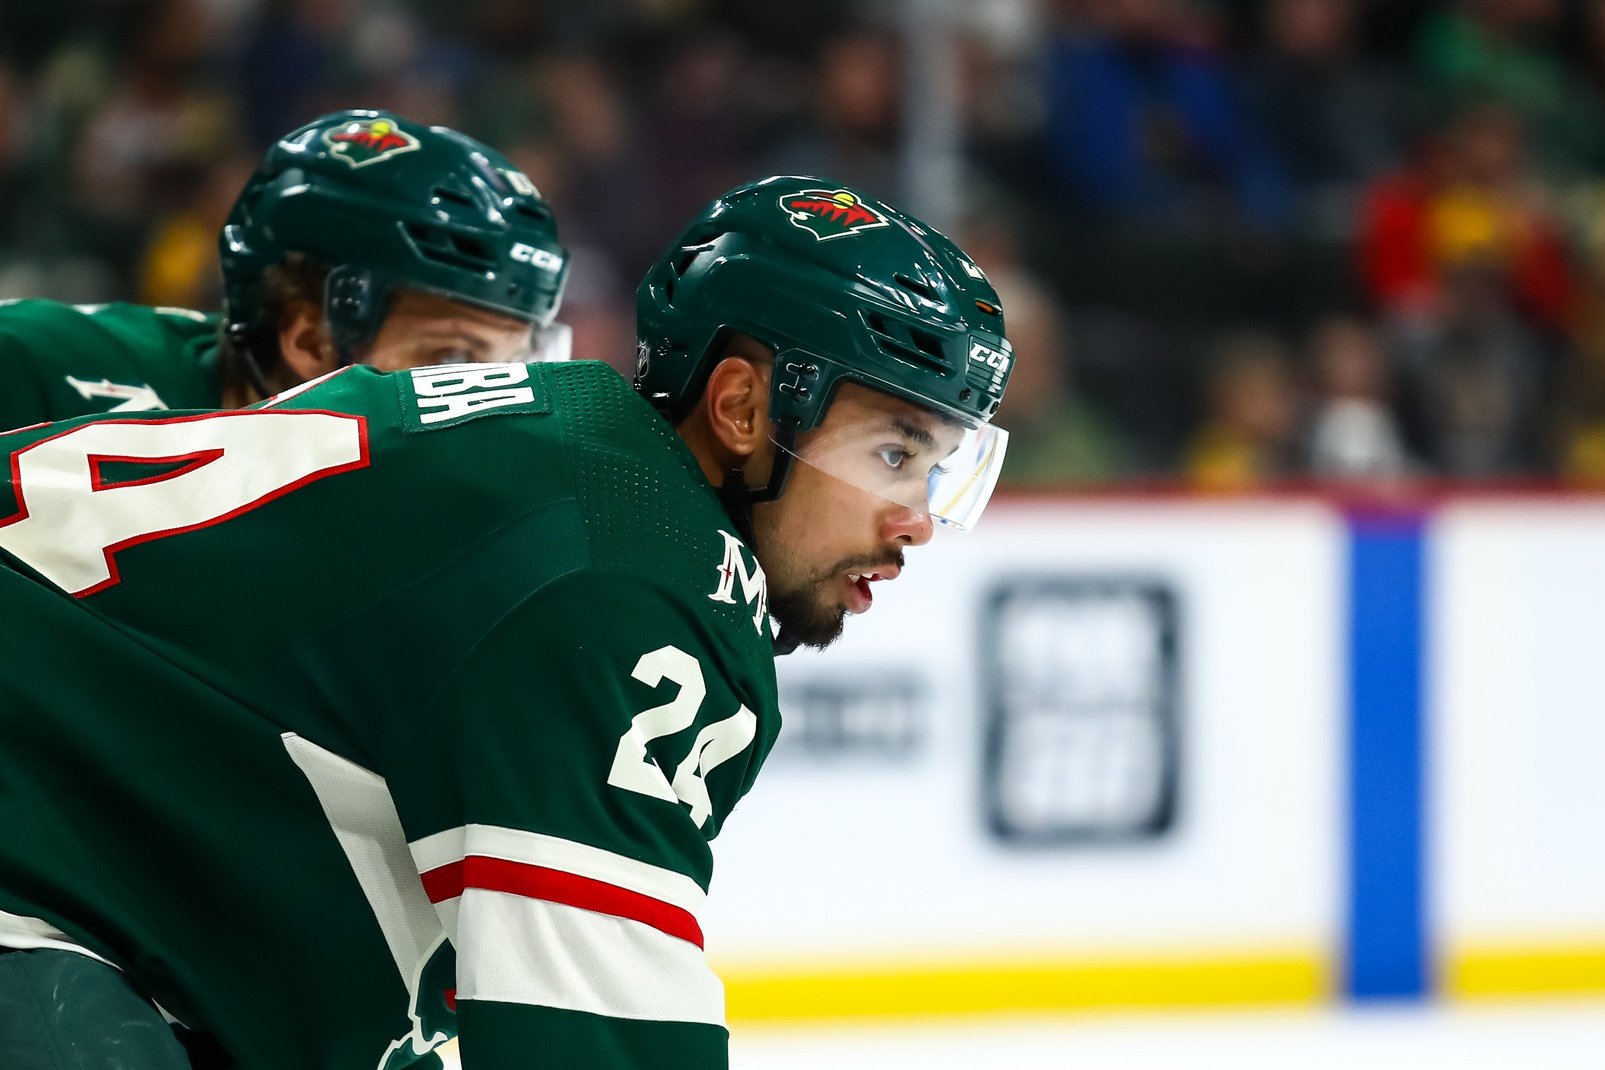 Could the ESPNs NHL Deal Force RSNs to Provide Better Streaming Options? - Minnesota Wild